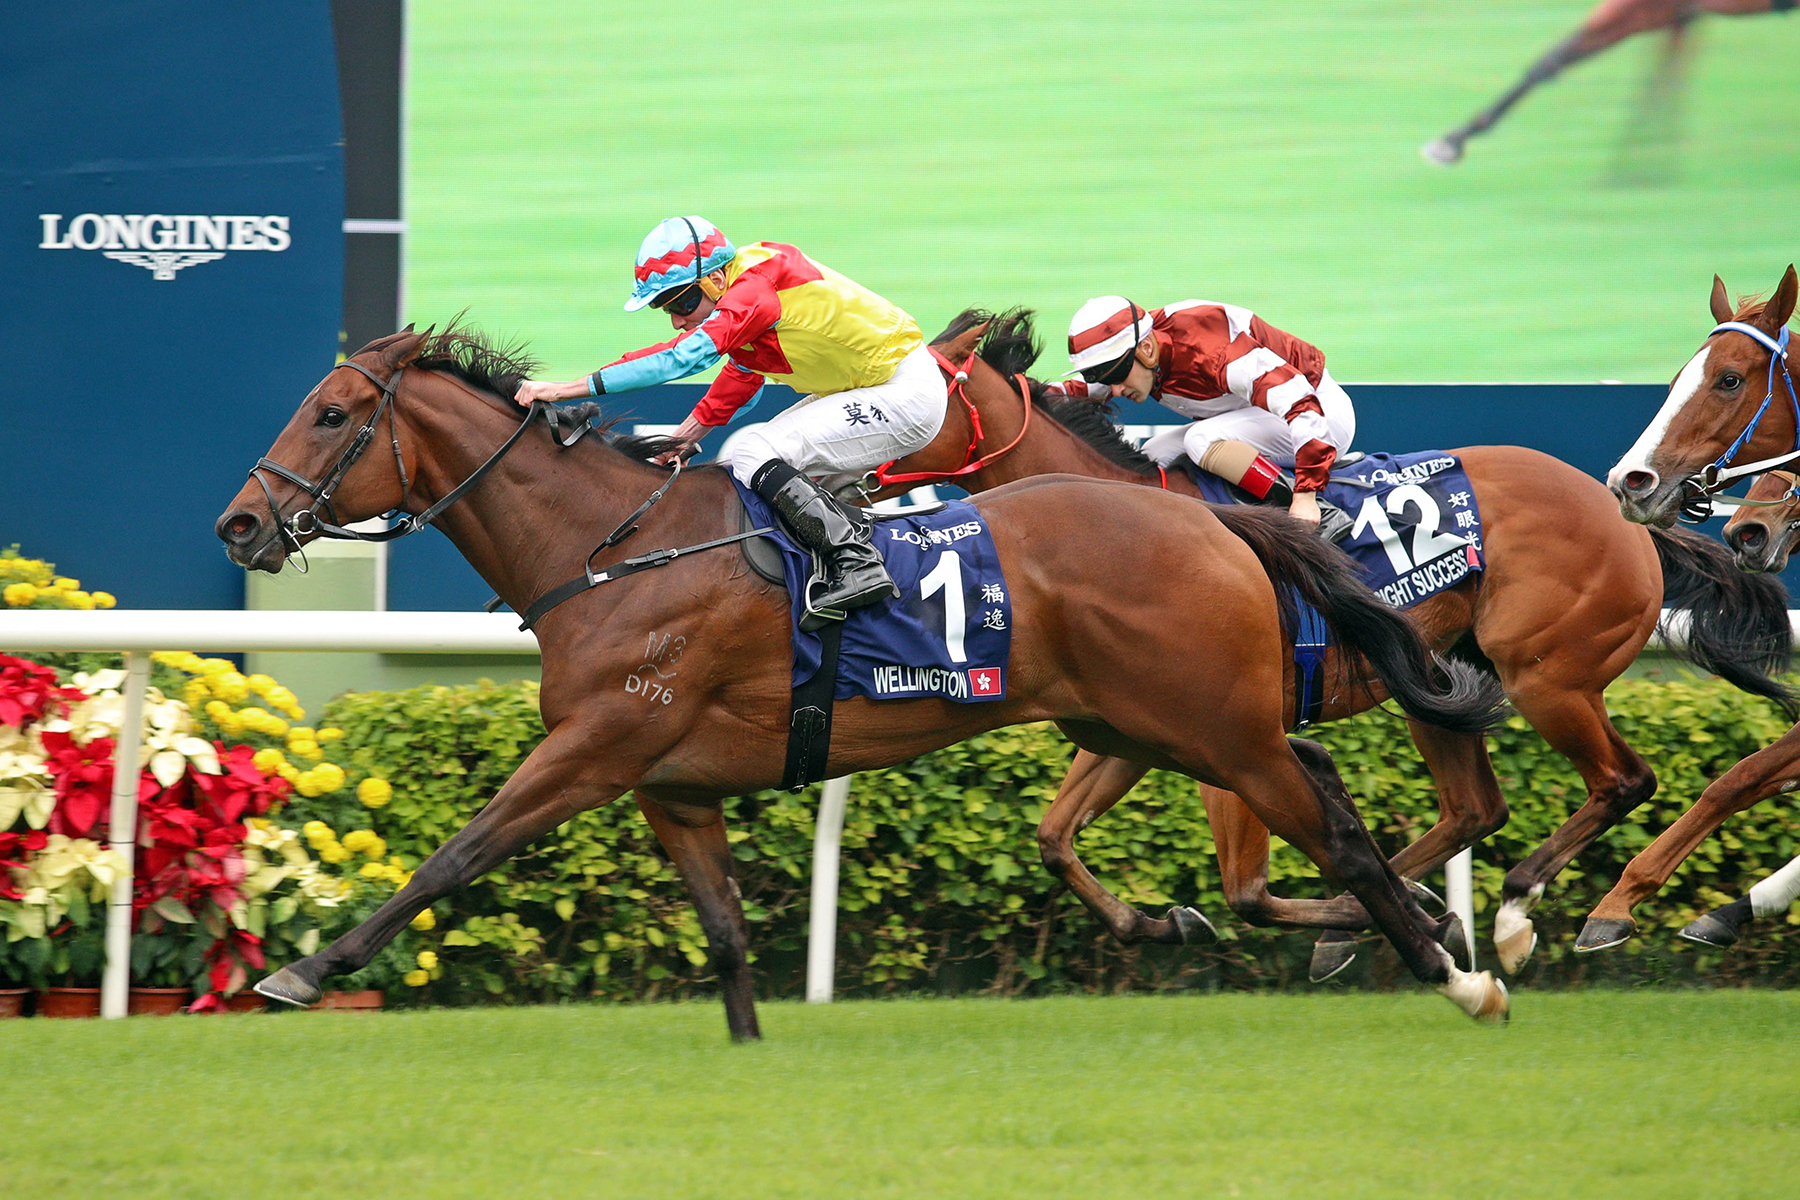 The LONGINES Hong Kong Sprint Photo Release – Racing News – The 